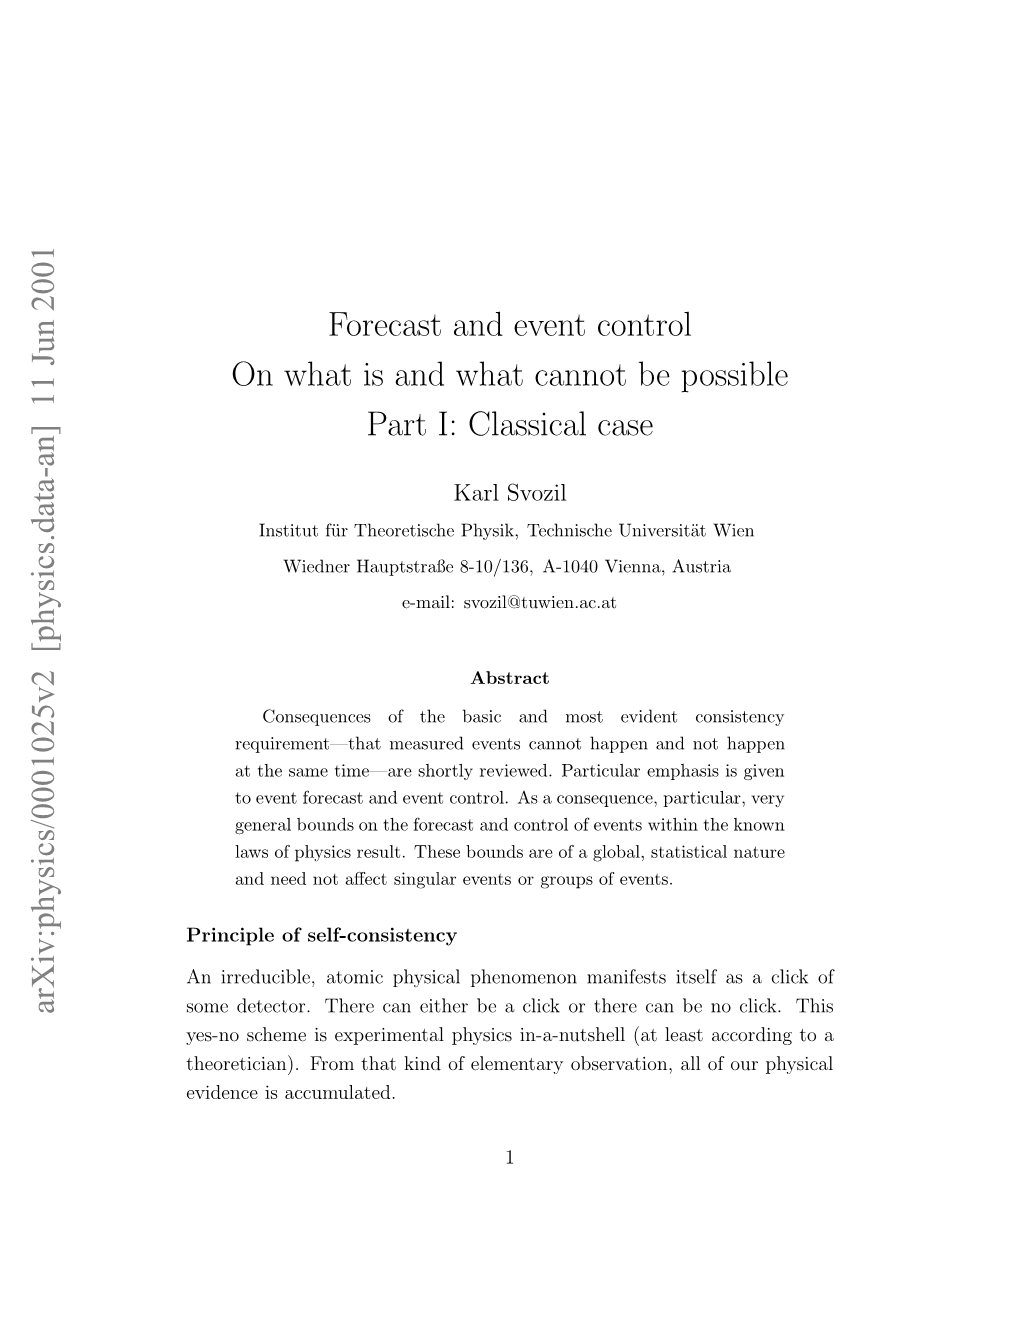 Forecast and Event Control: on What Is and What Cannot Be Possible